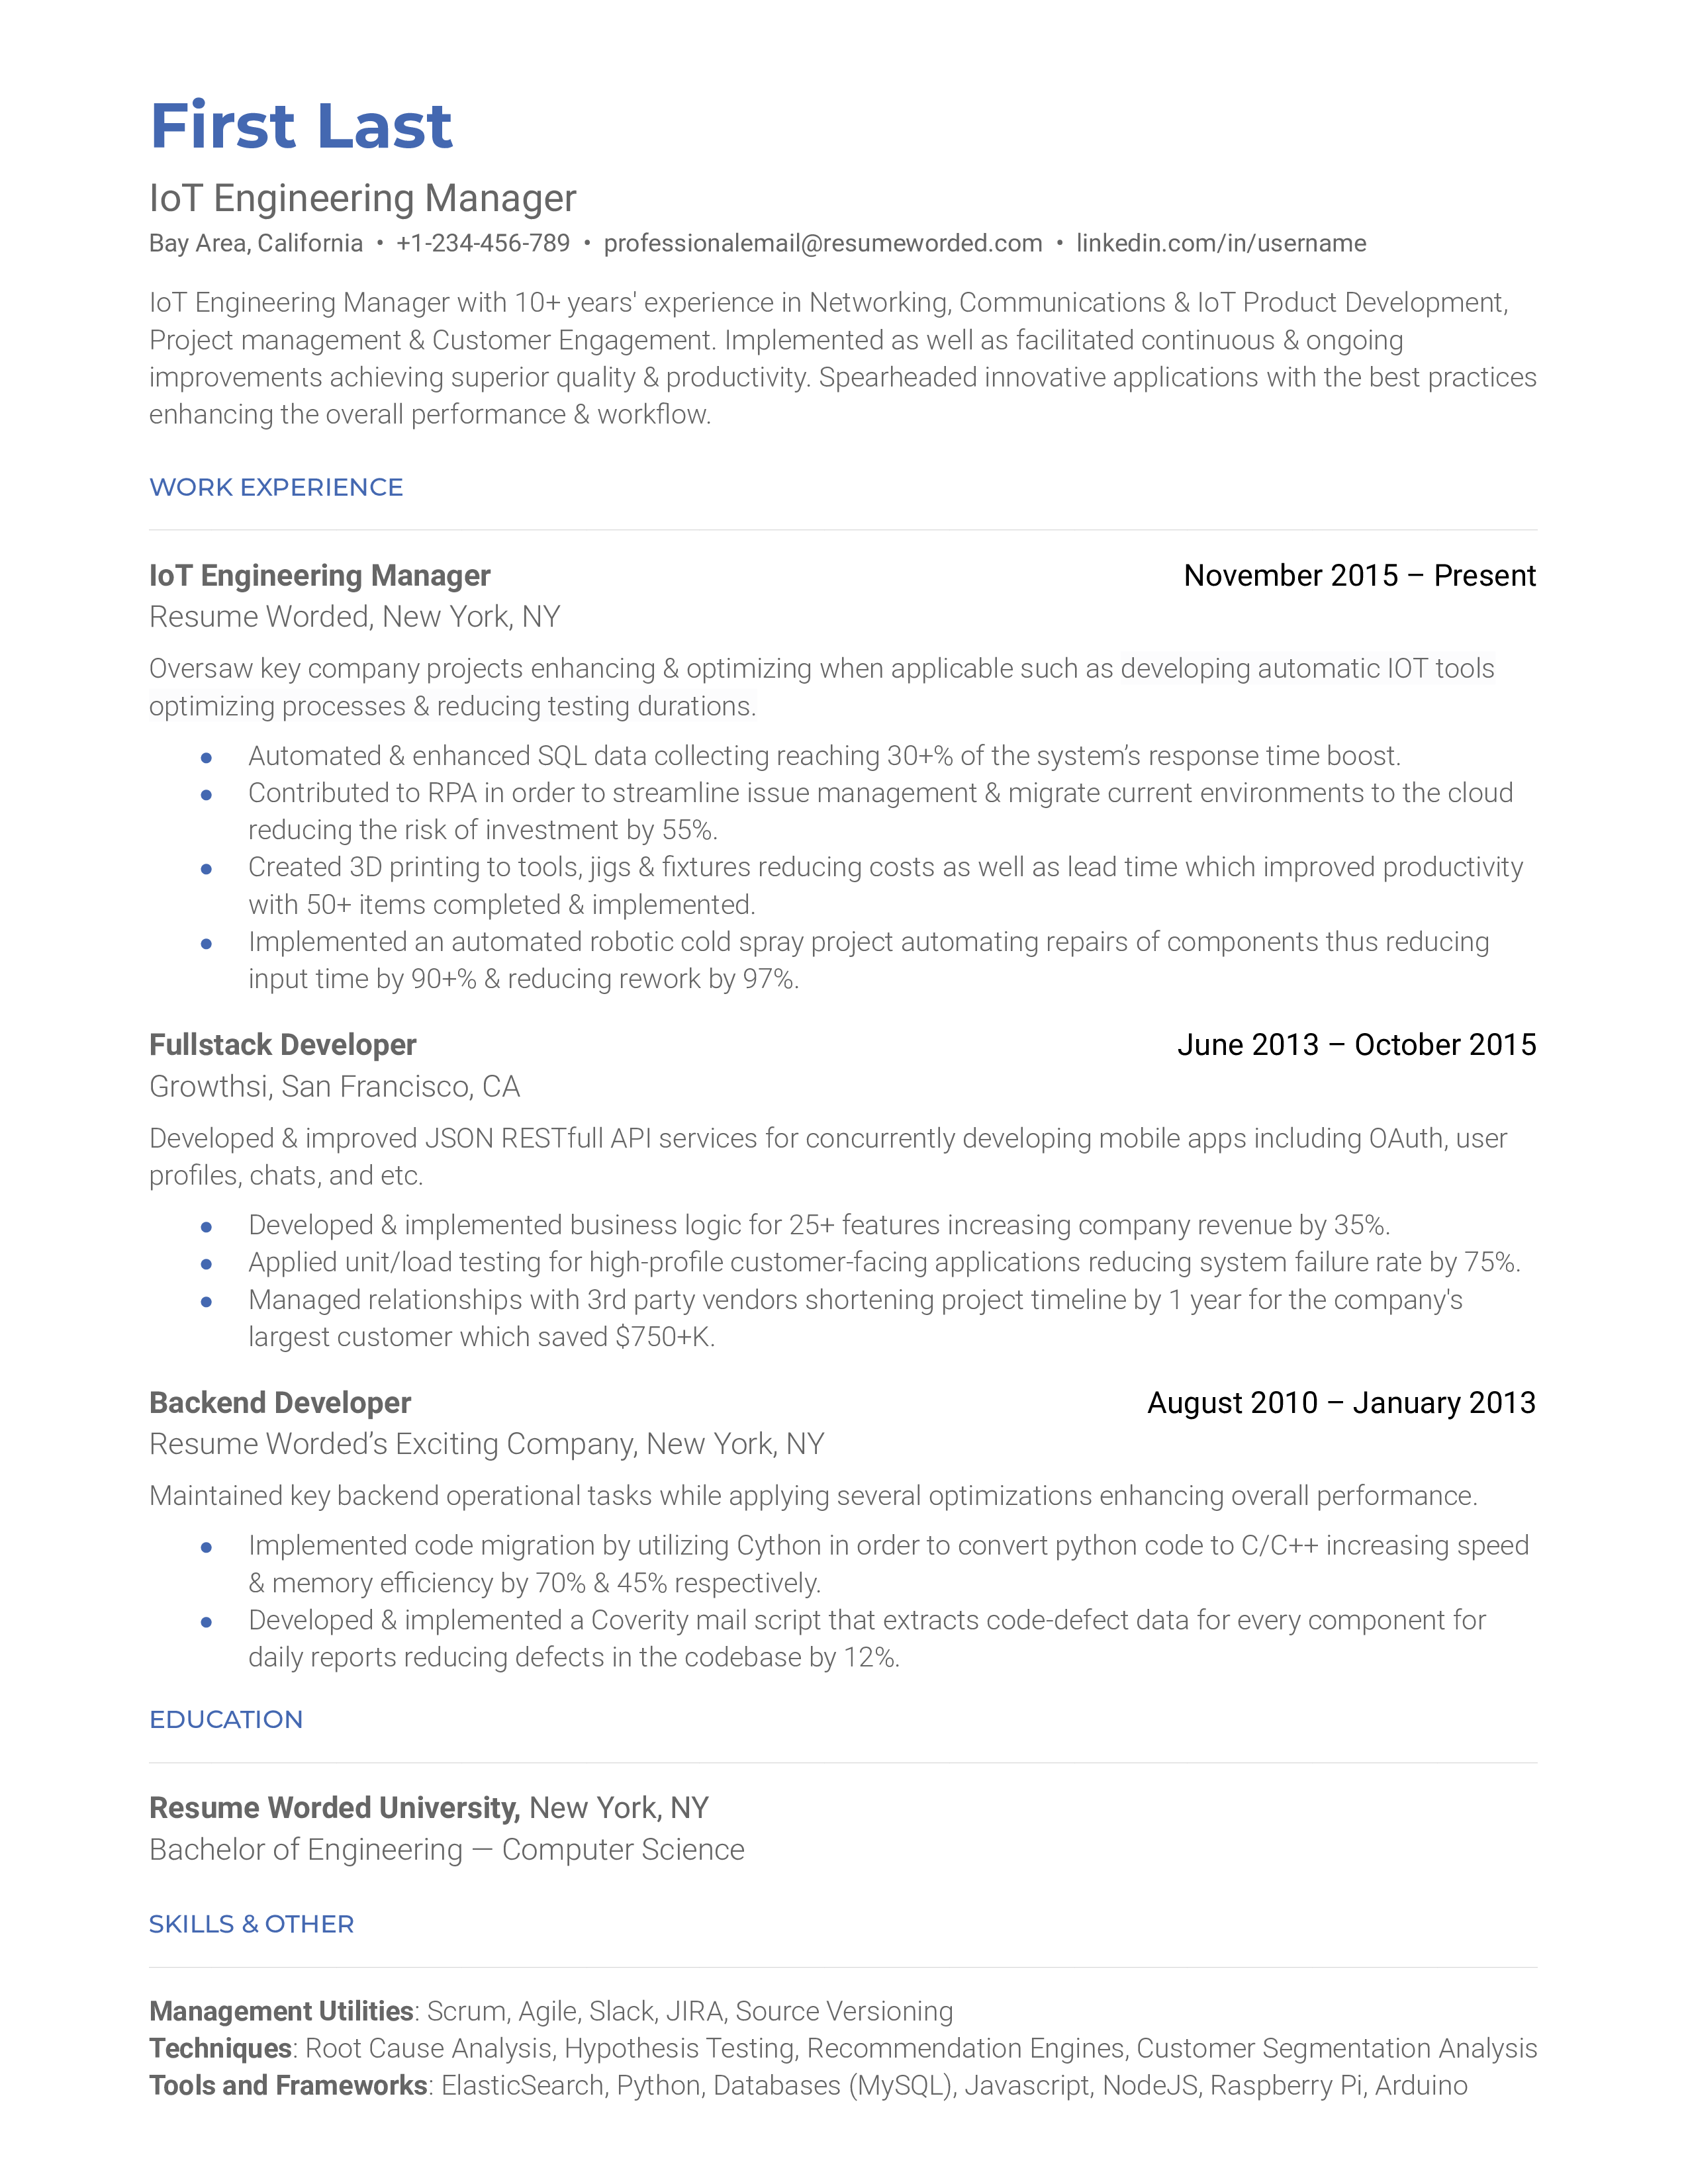 This is the resume of an IoT engineeering manager that highlights experience at diffeent companies.